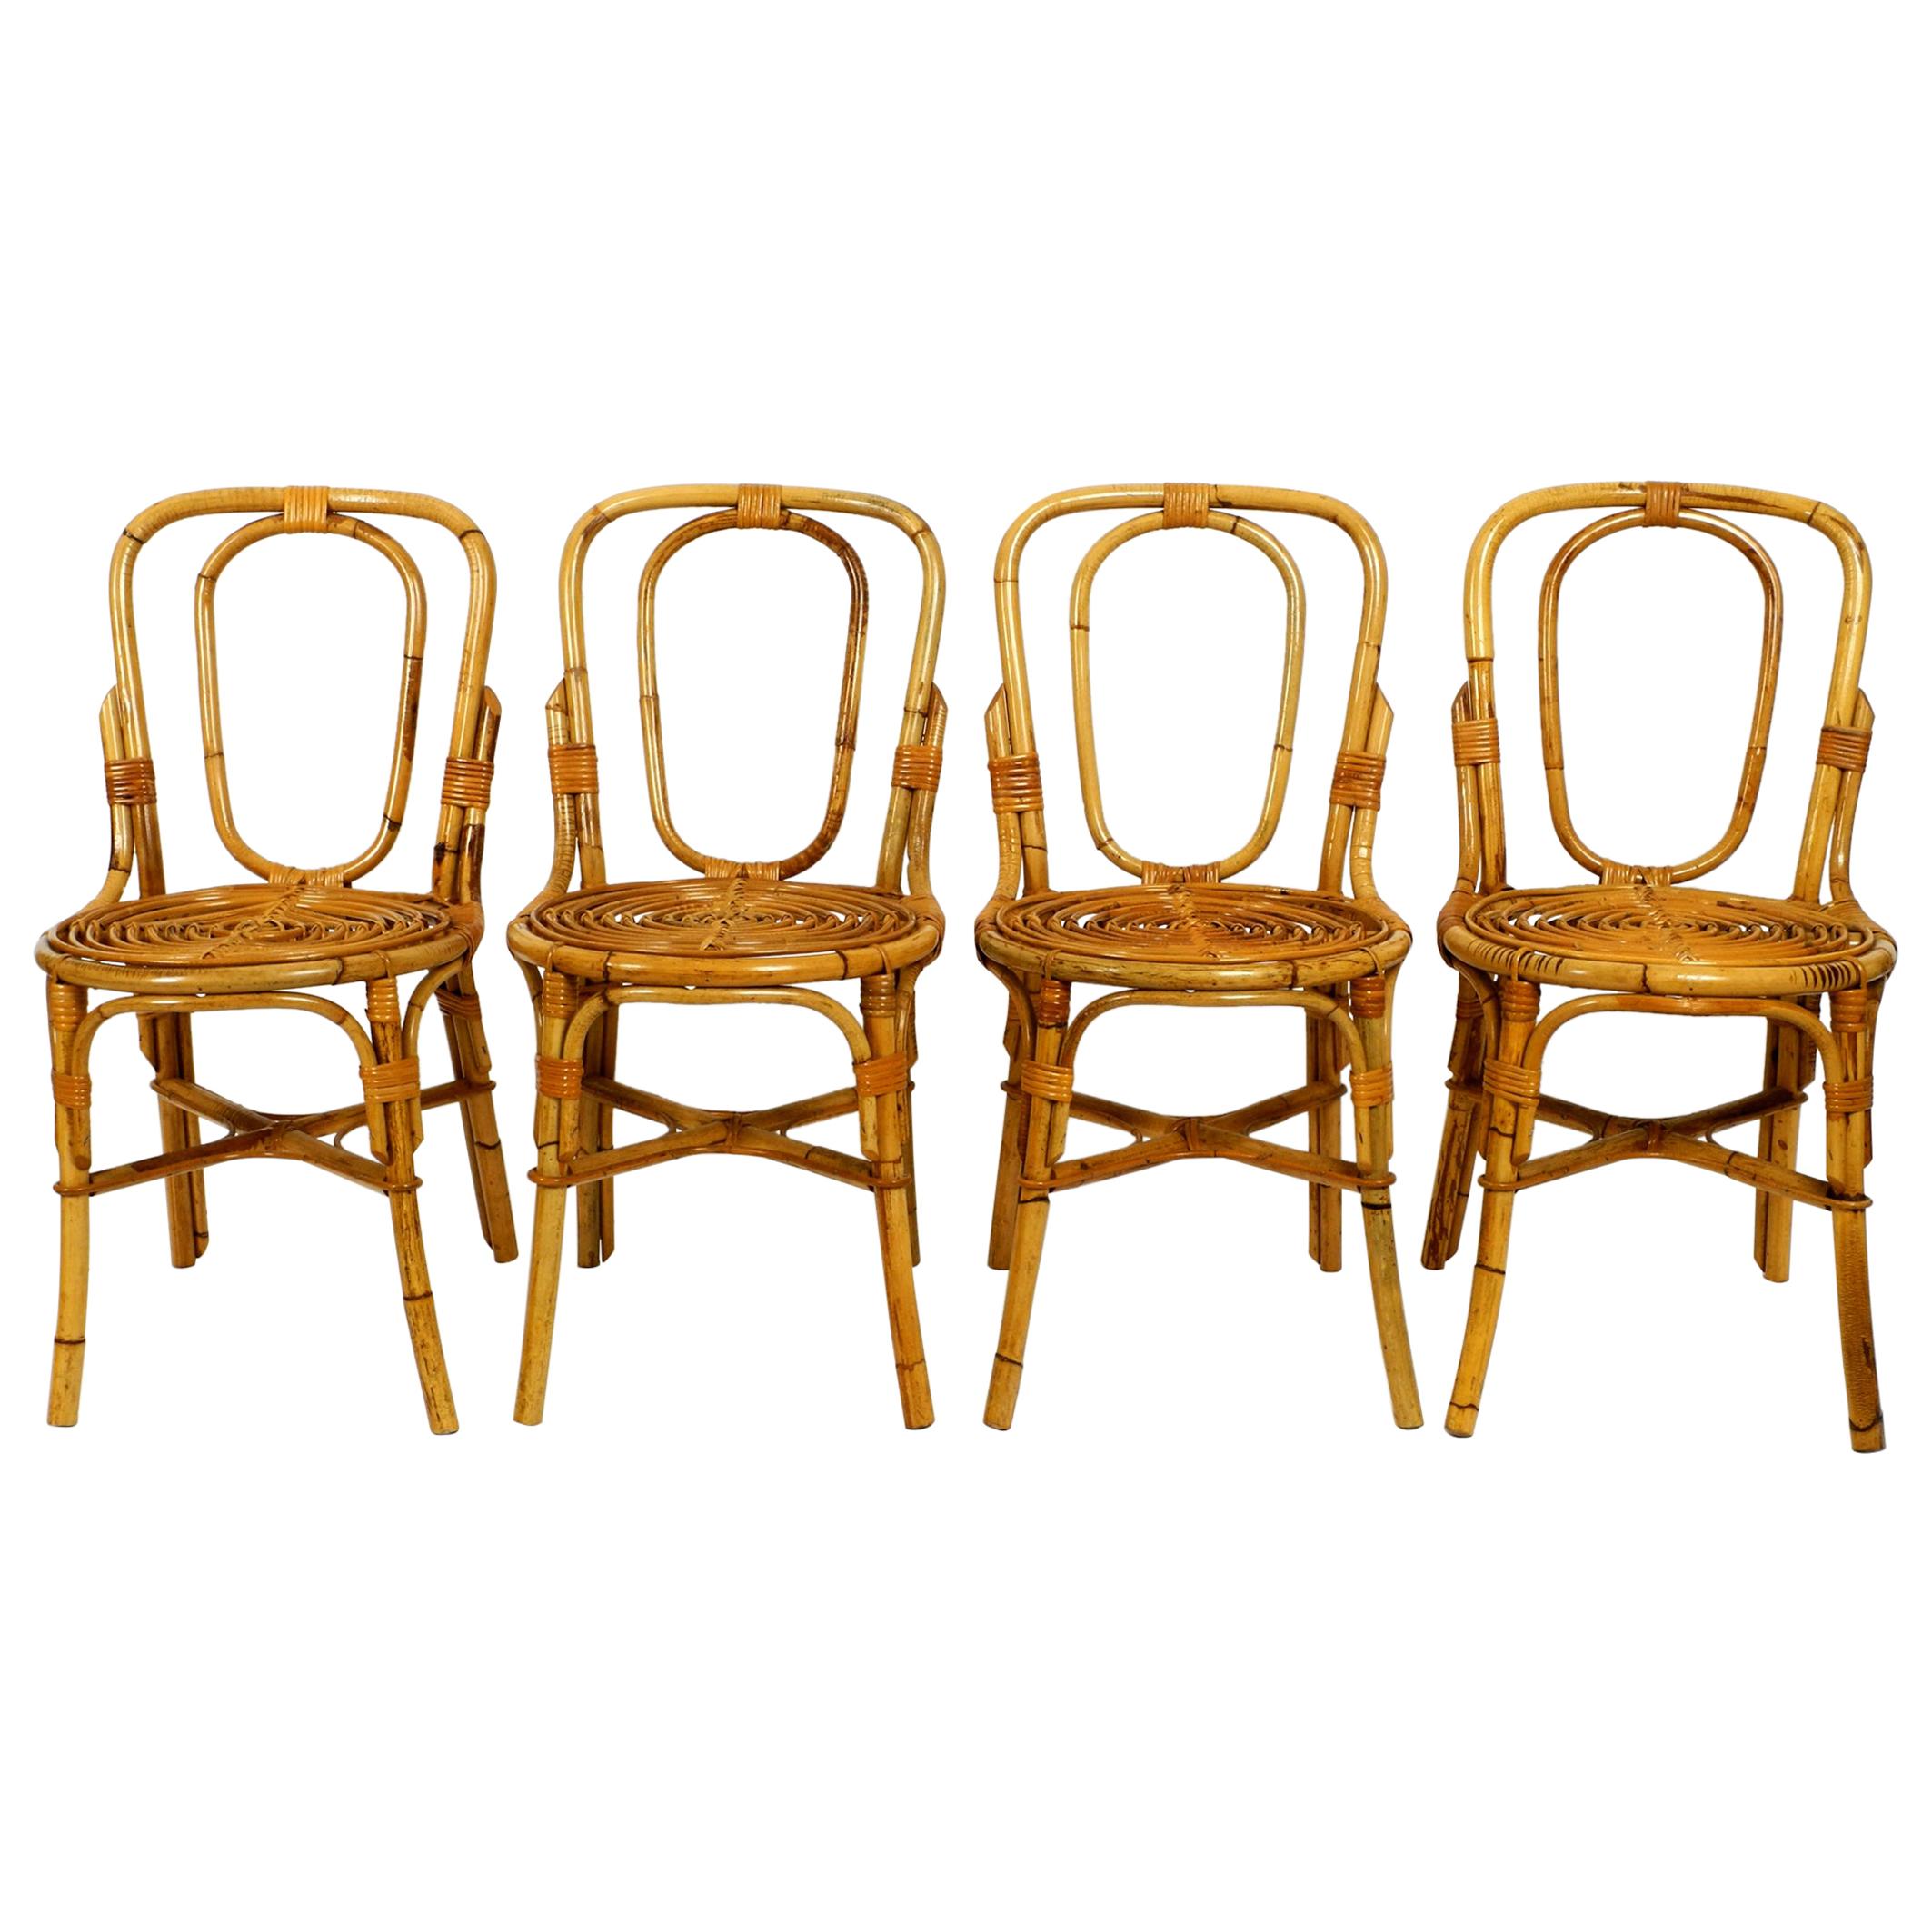 Four 1960s Italian Bamboo Dining Room Chairs in a Very Good Vintage Condition